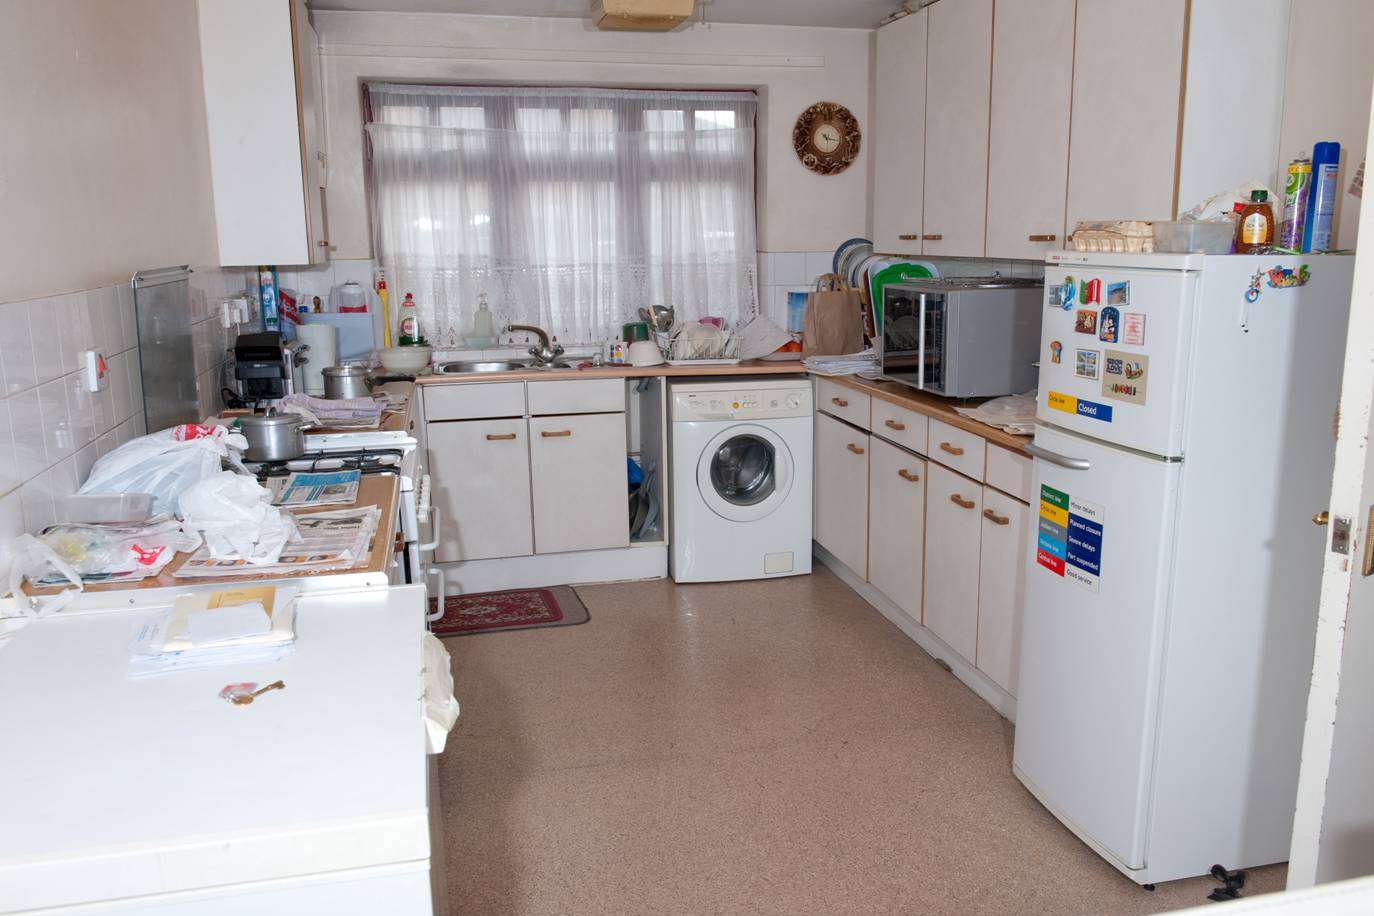 The kitchen at the Perivale address